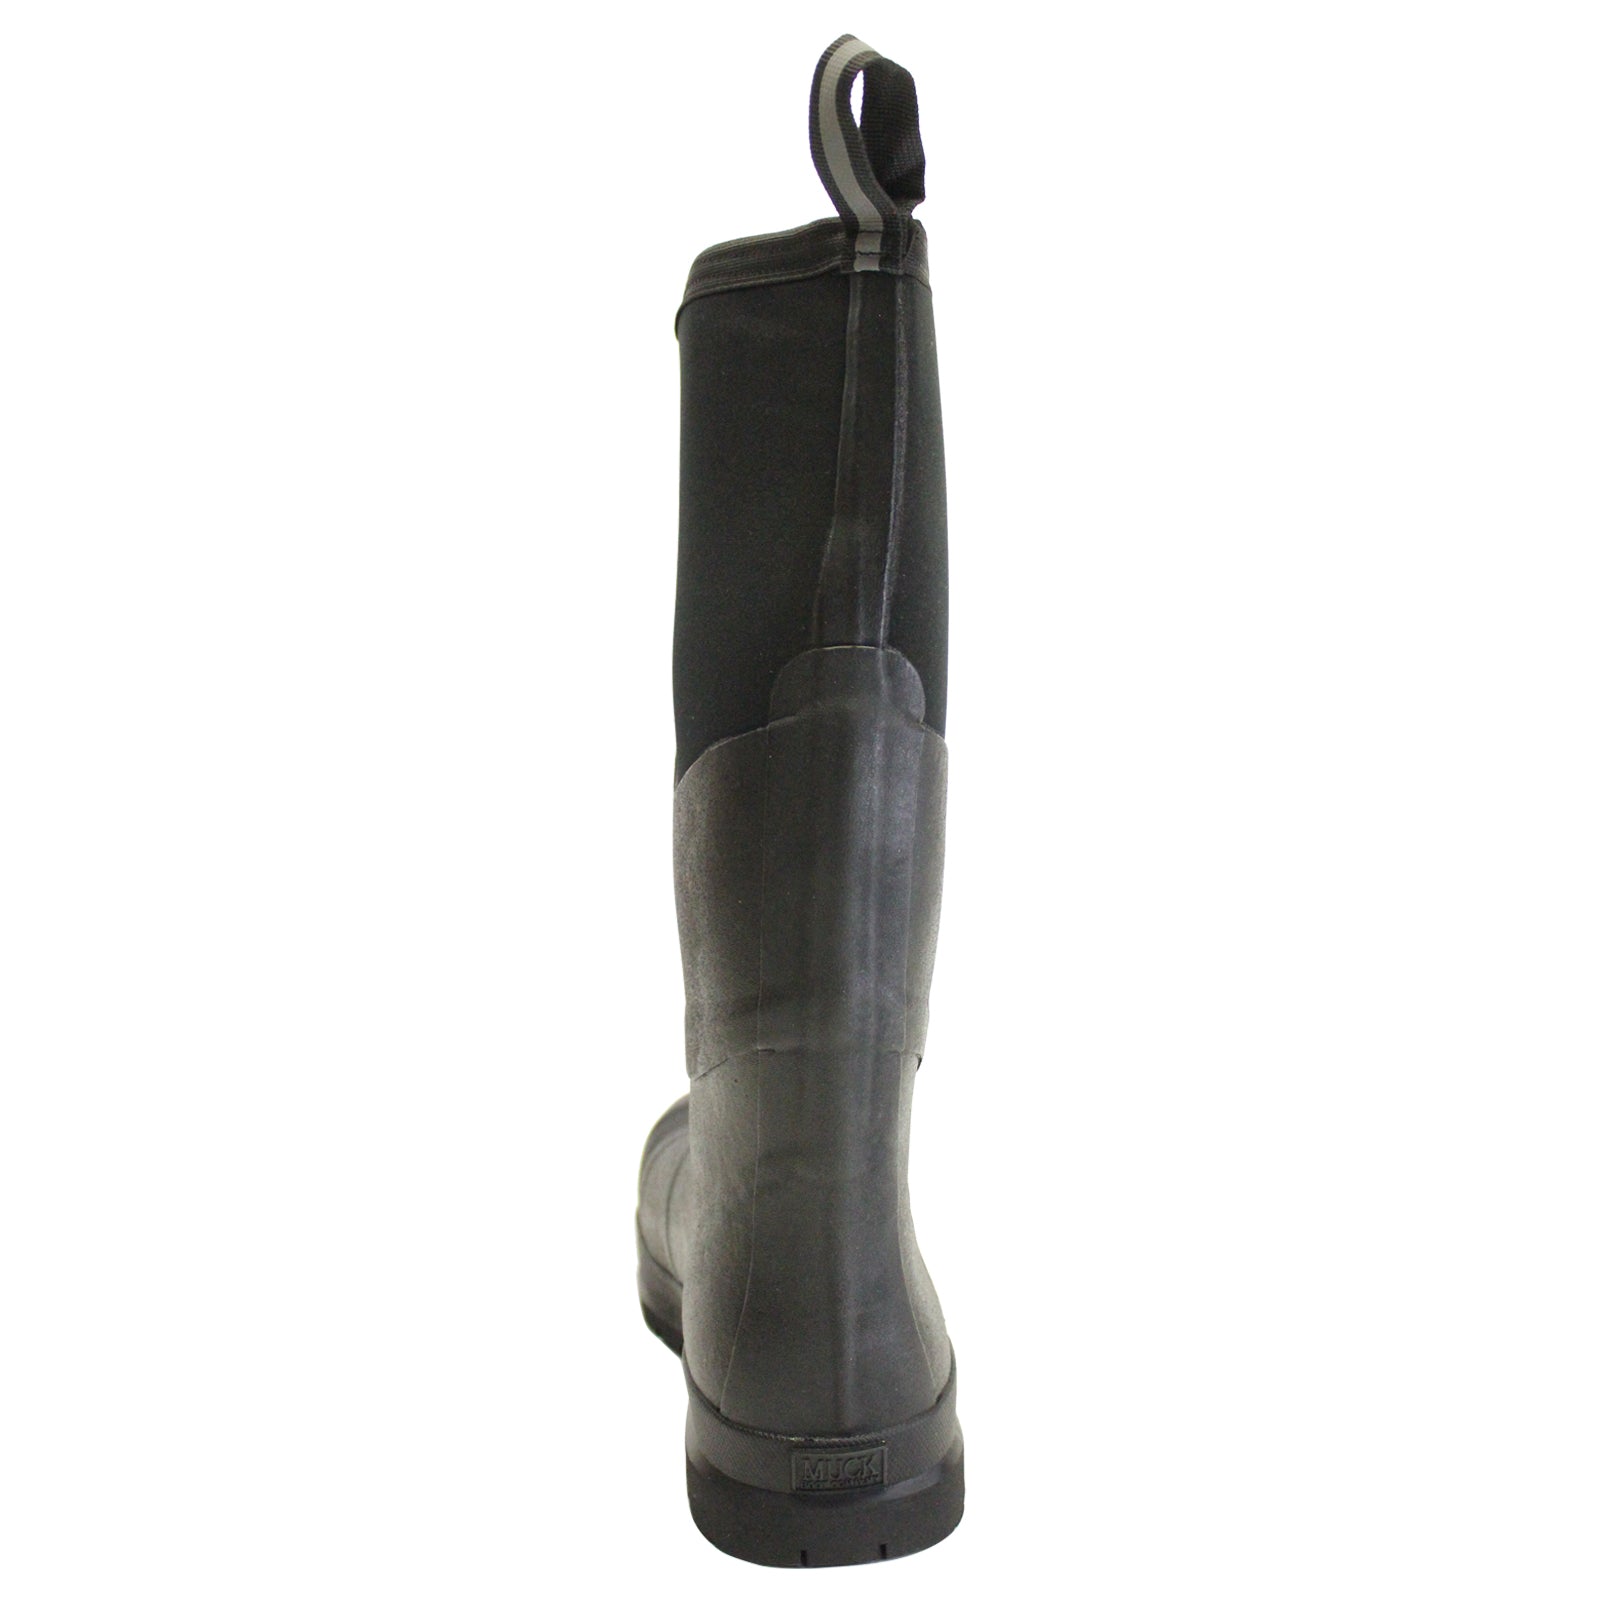 Muck Boot Chore Max Steel Toe S5 Rubber Men's Tall Wellington Boots#color_black